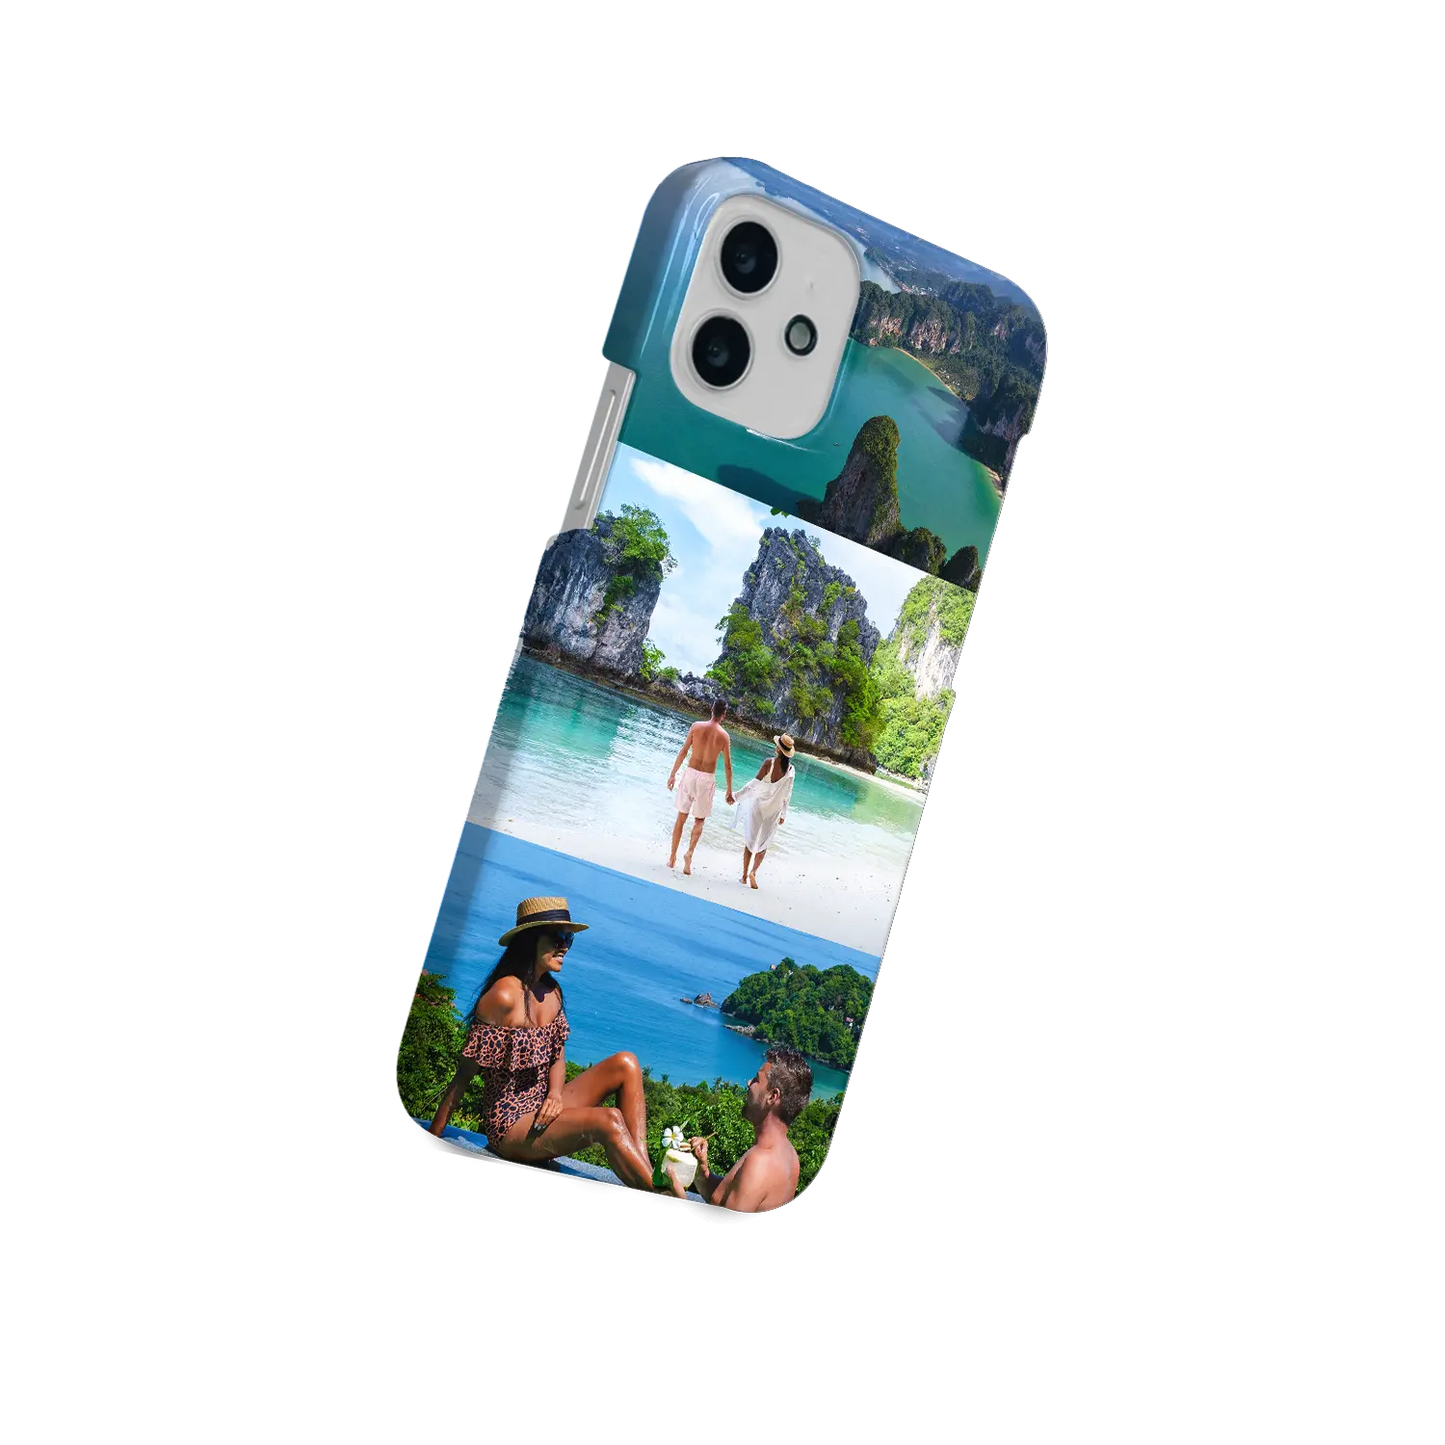 3 Pictures - Personalised Galaxy A Case